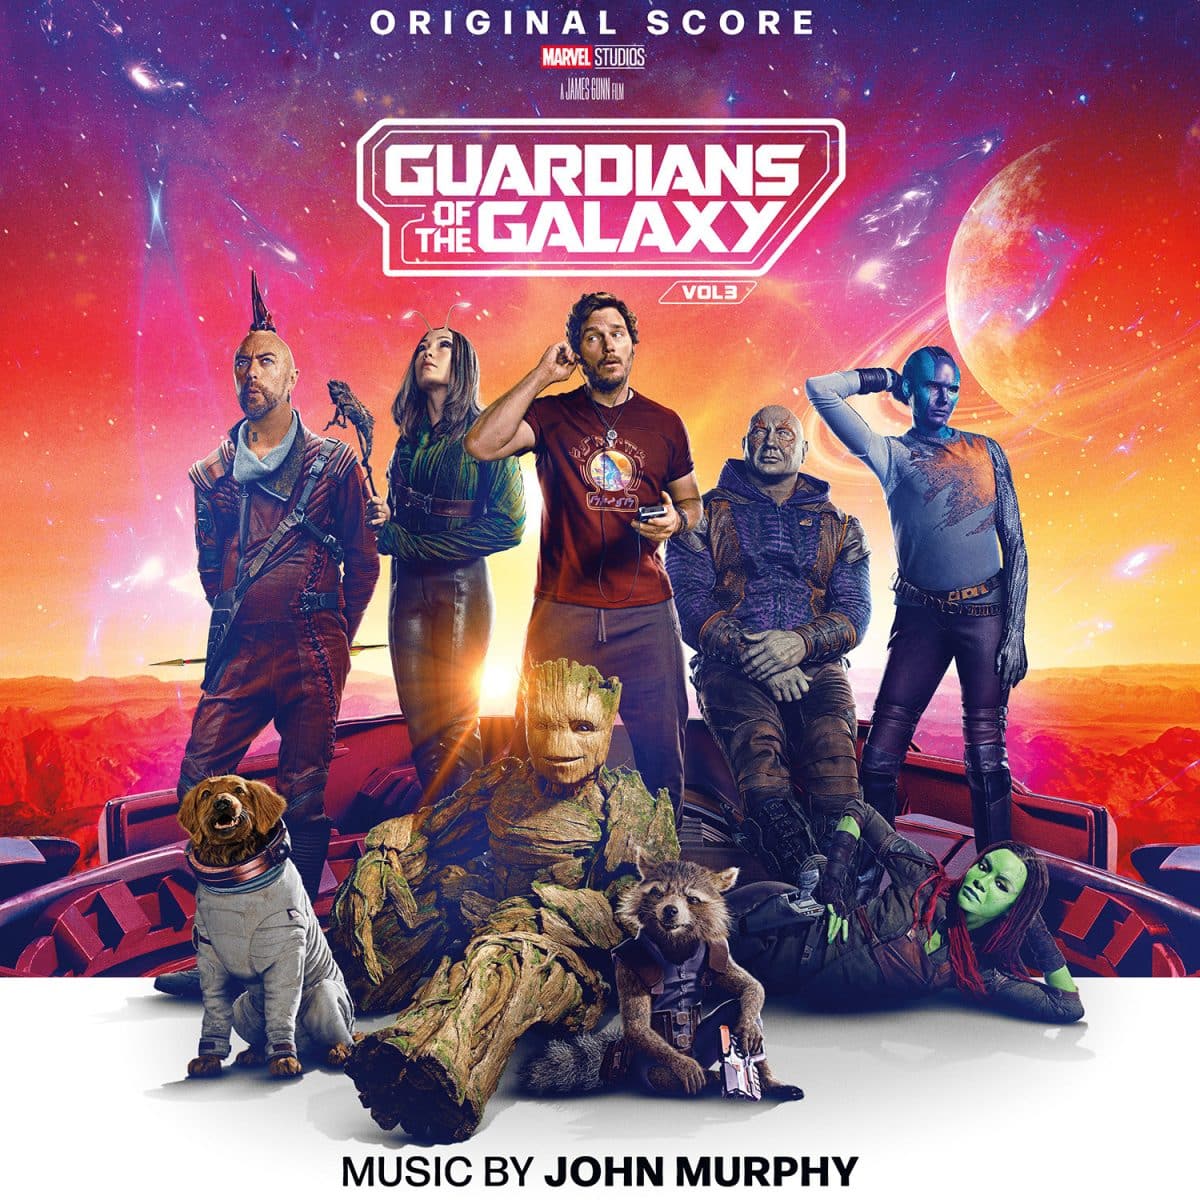 Original Score Soundtrack to GUARDIANS OF THE GALAXY VOL. 3 from composer John Murphy